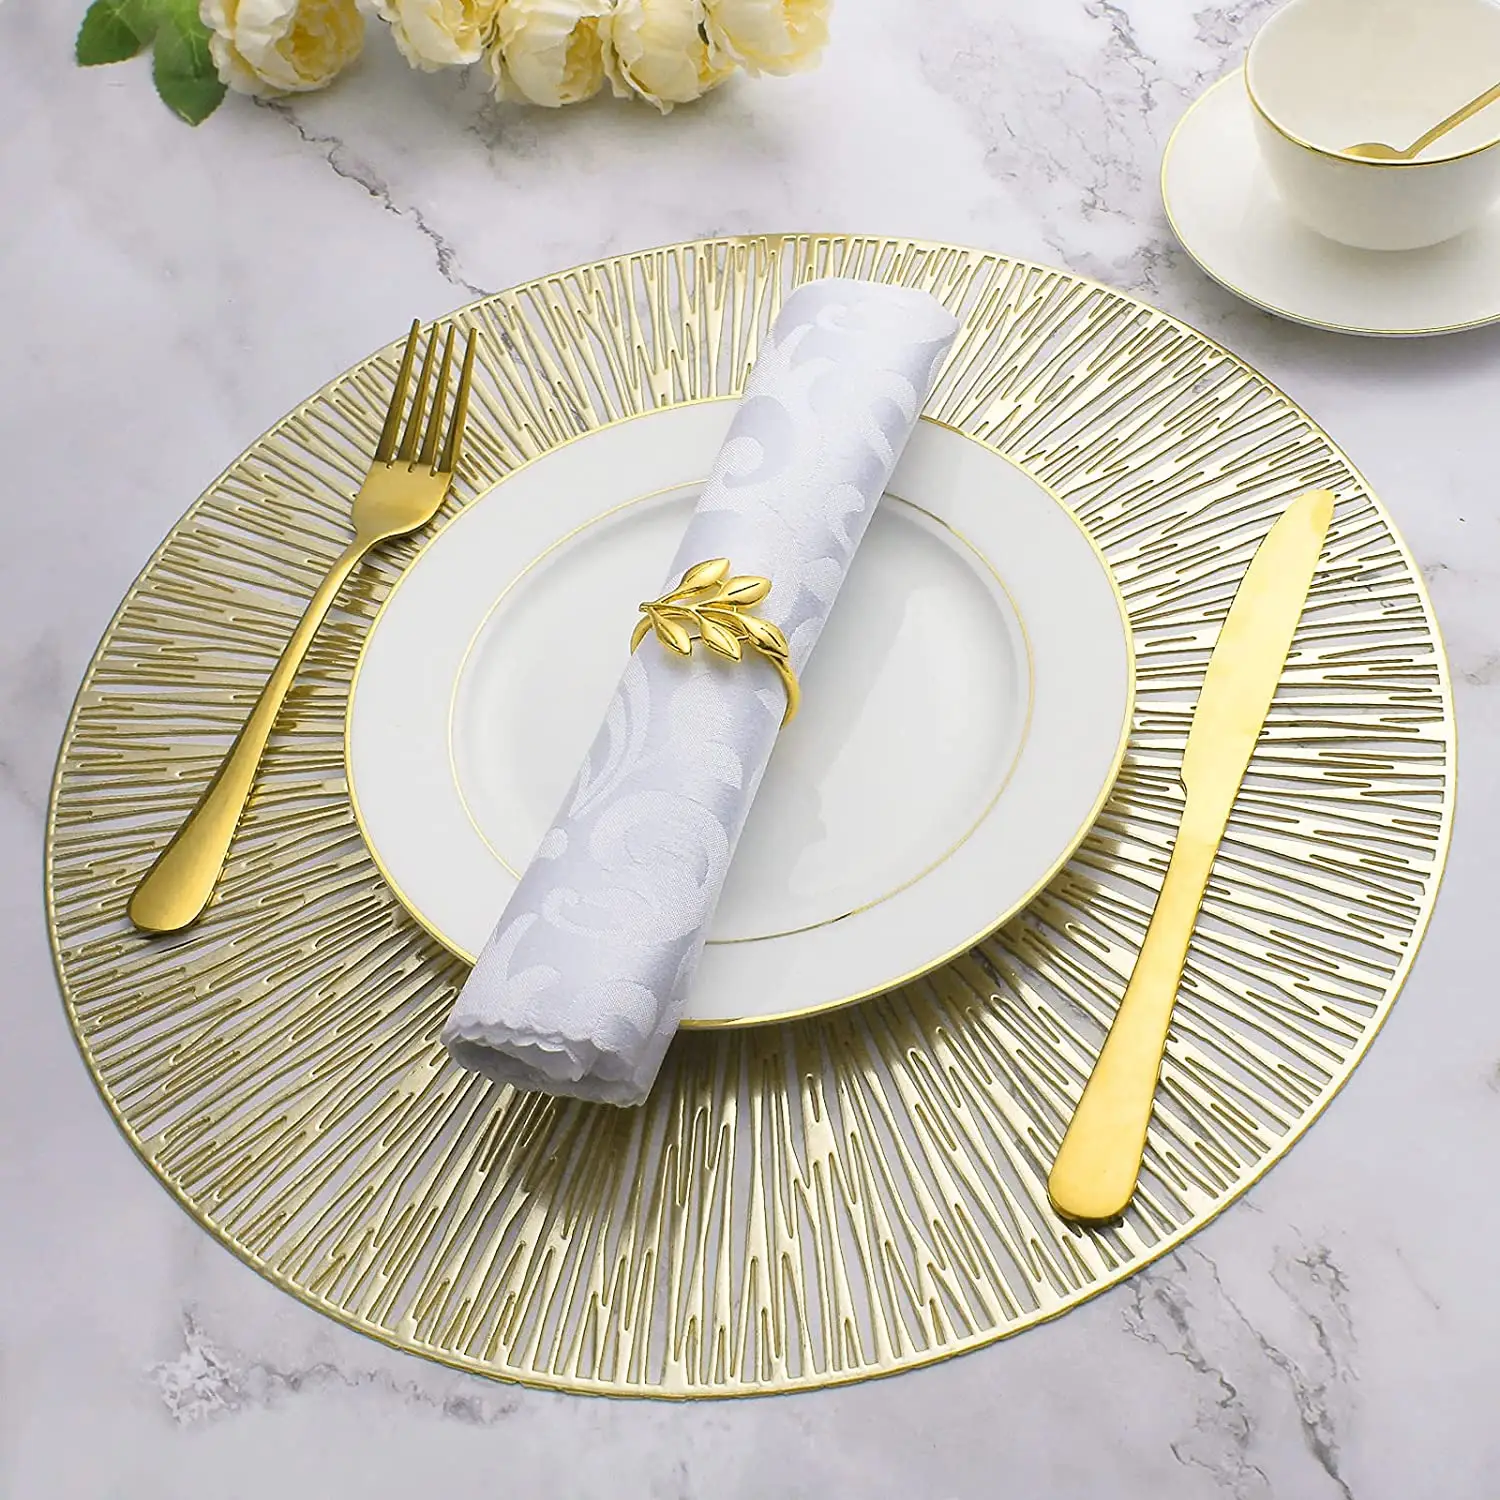 2022 Tabletex Gold Luxury PVC Injection Molded Placemat for Hotel/Wedding Occasion Placemat